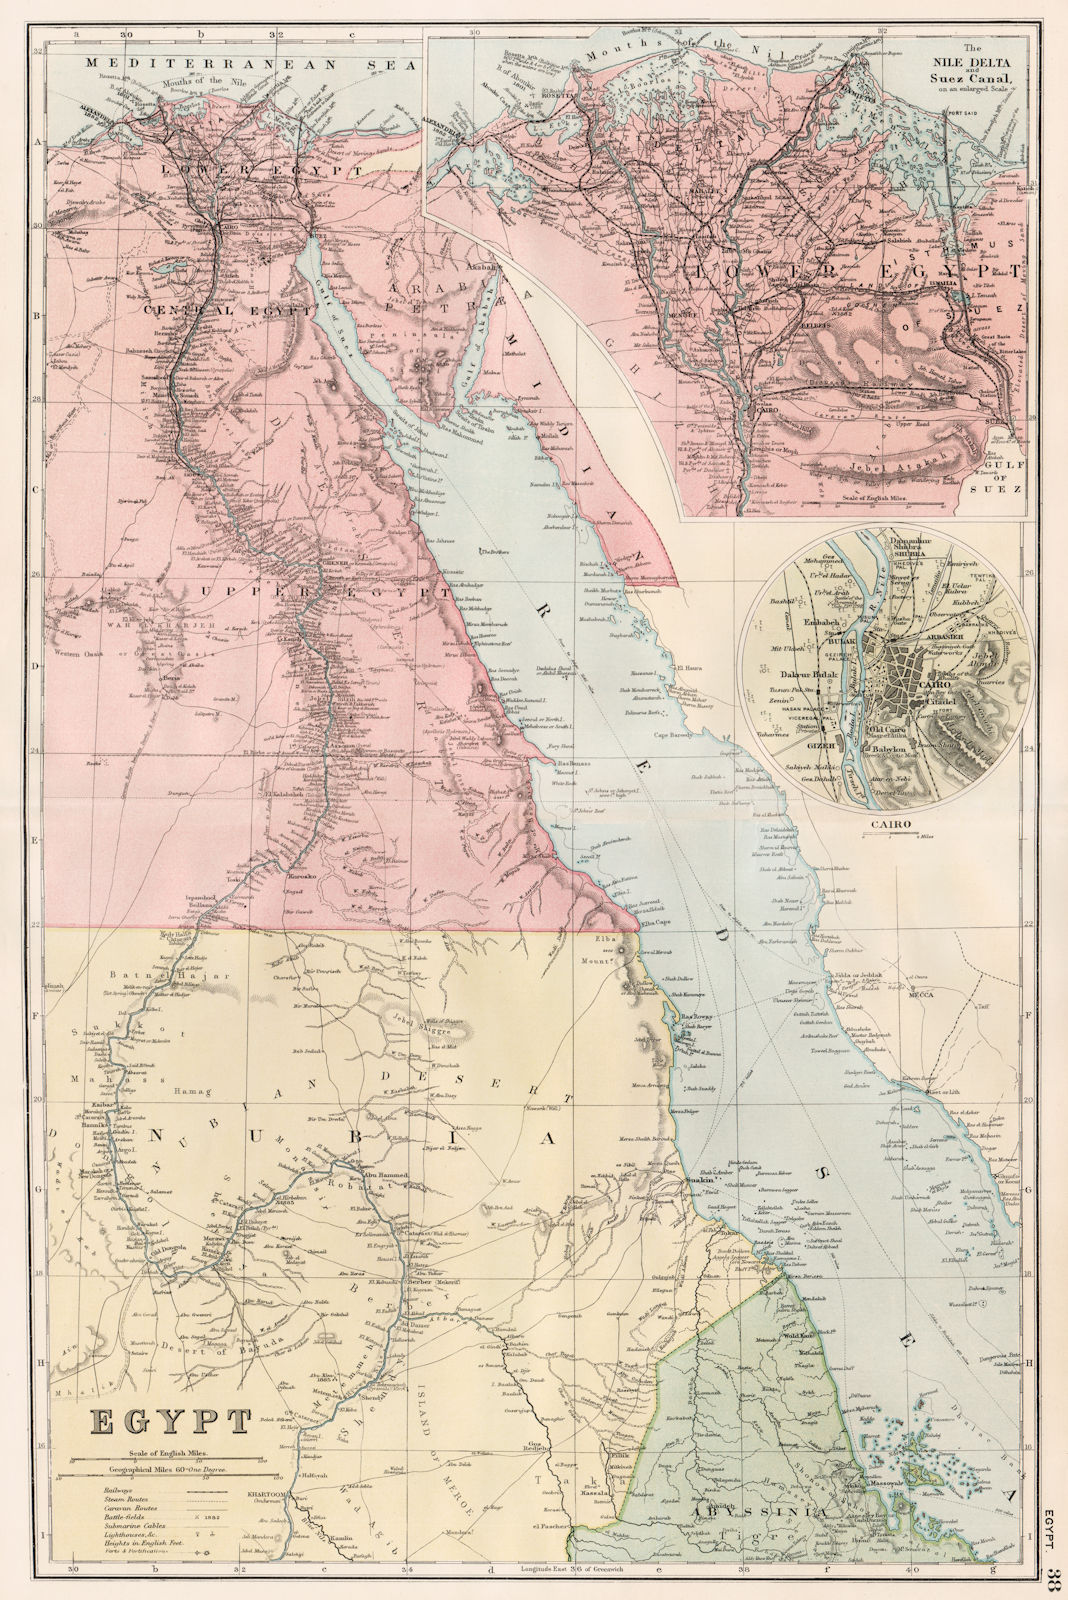 Associate Product EGYPT & NILE VALLEY.Inset Delta & Suez Canal;Cairo.Battlefields.BACON 1893 map